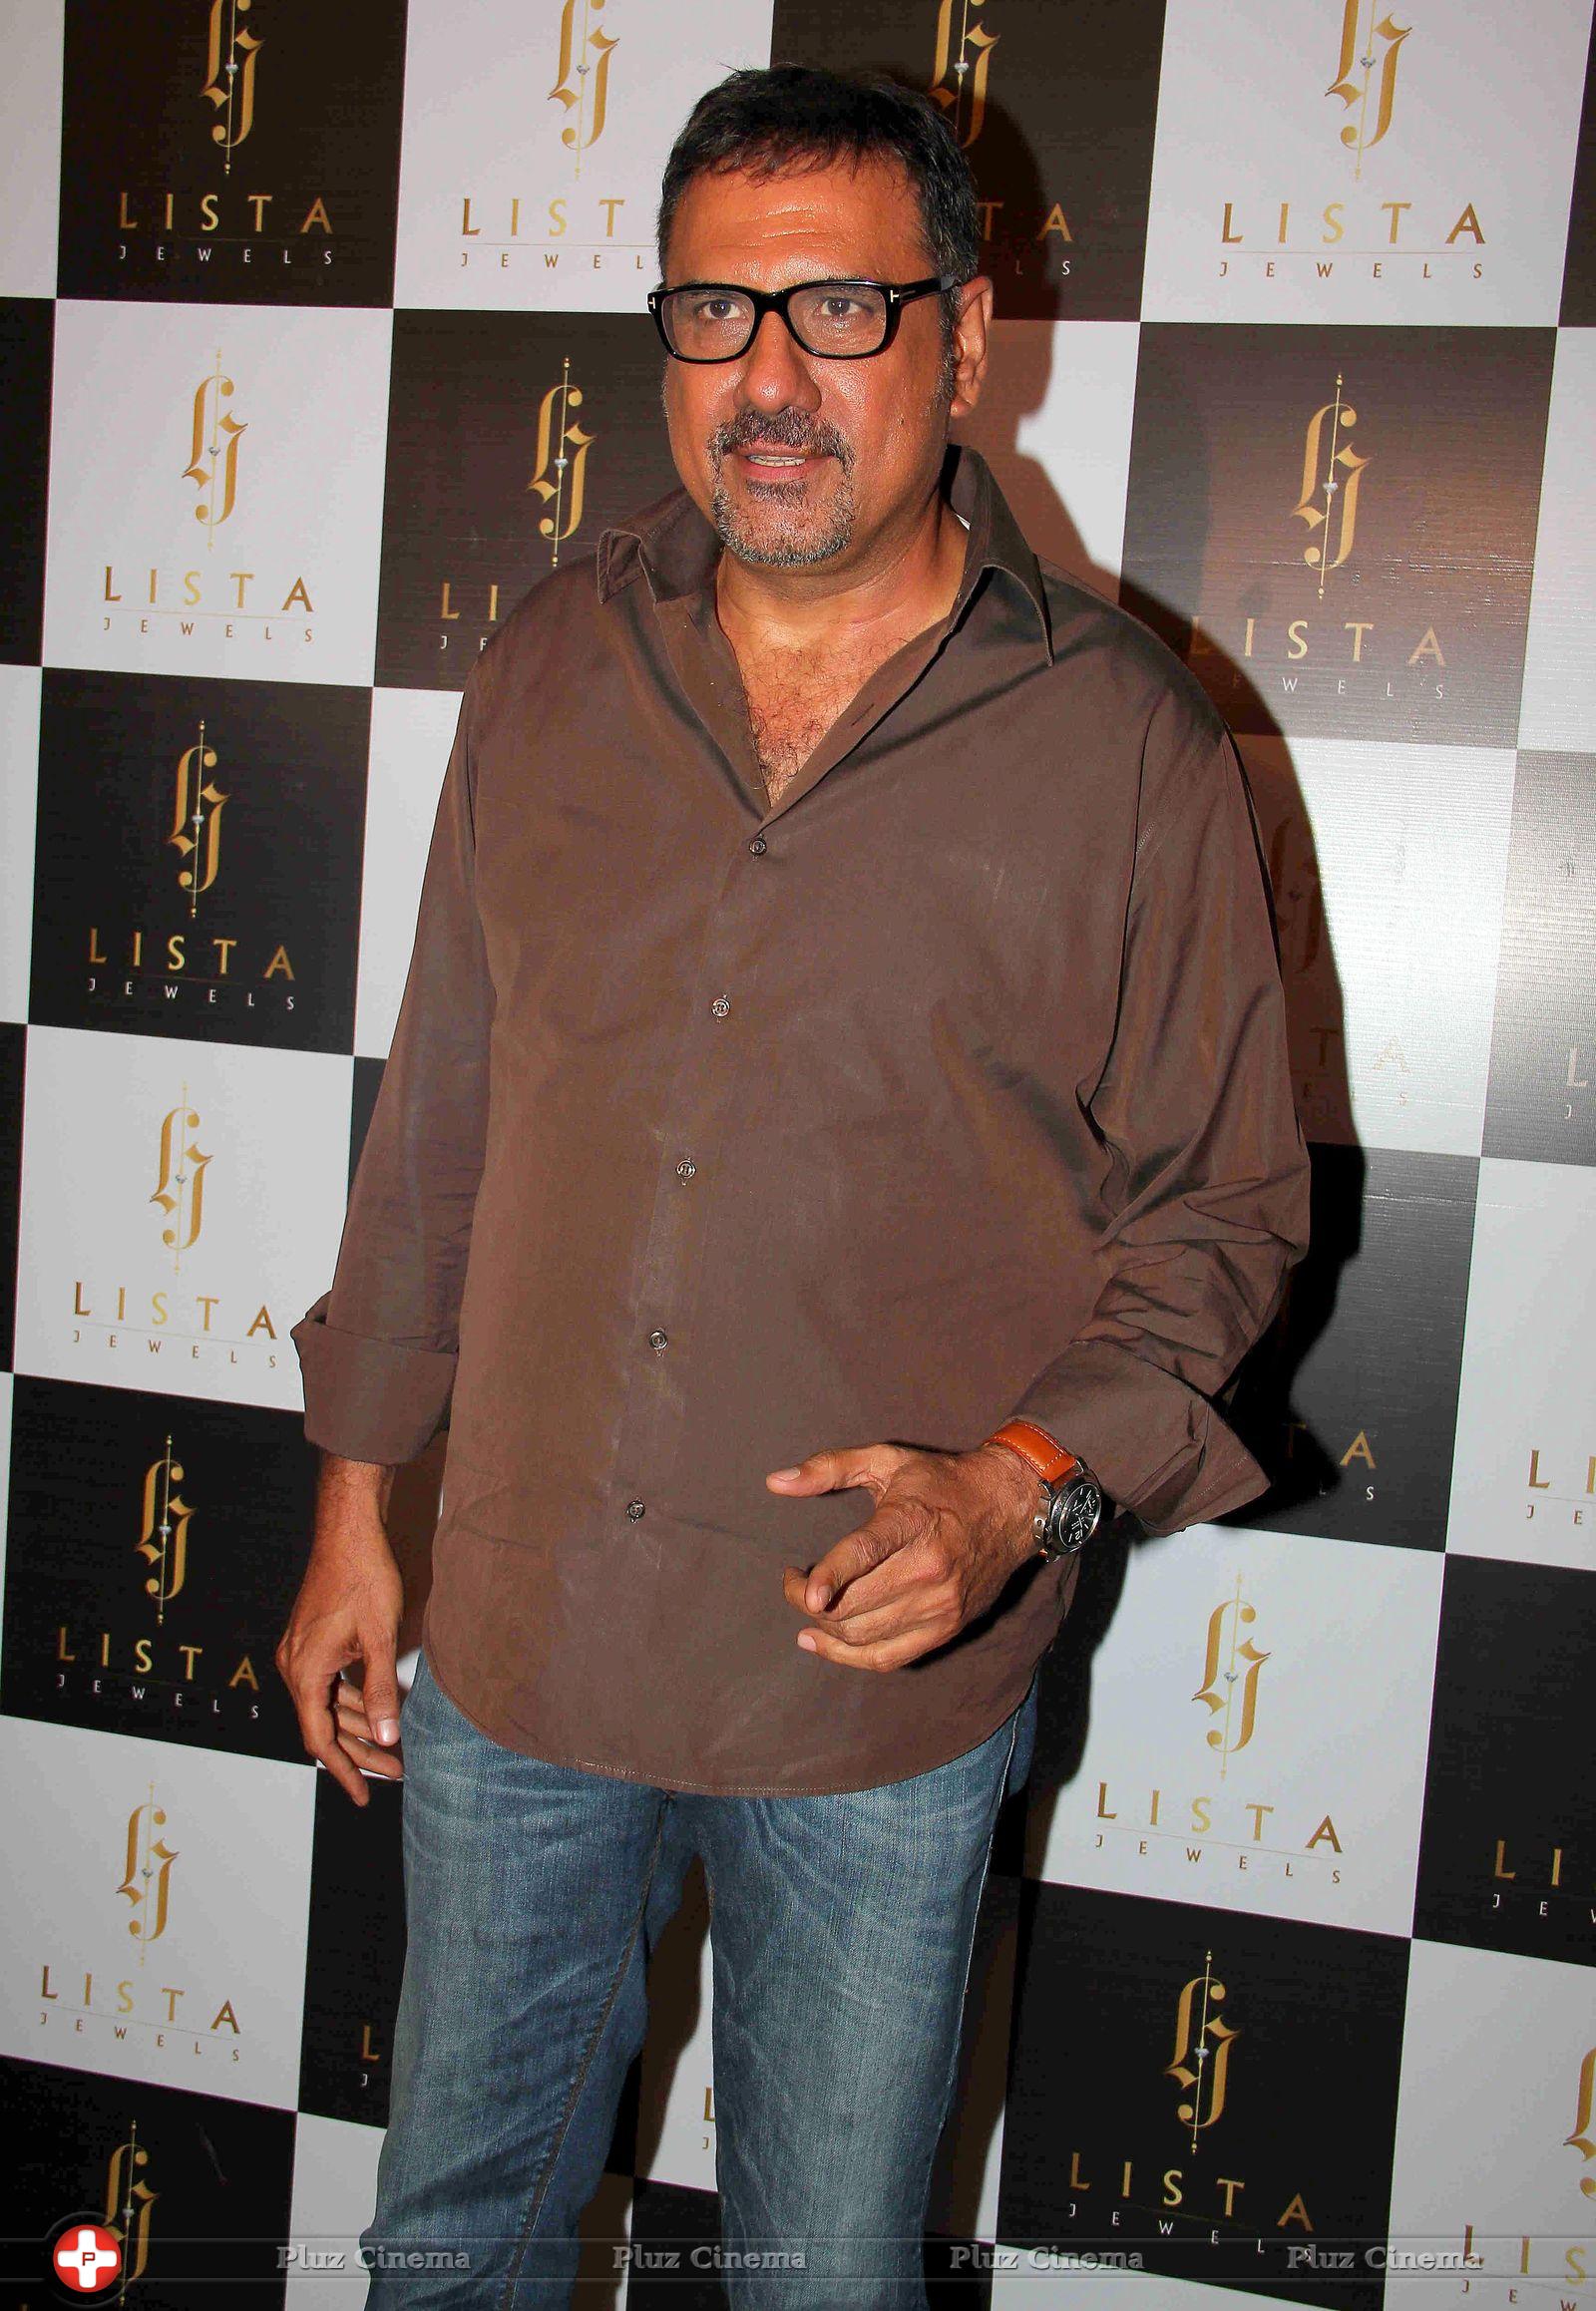 Boman Irani - Shahrukh Khan & Others at The Launch of Lista Jewellery Store Photos | Picture 622829